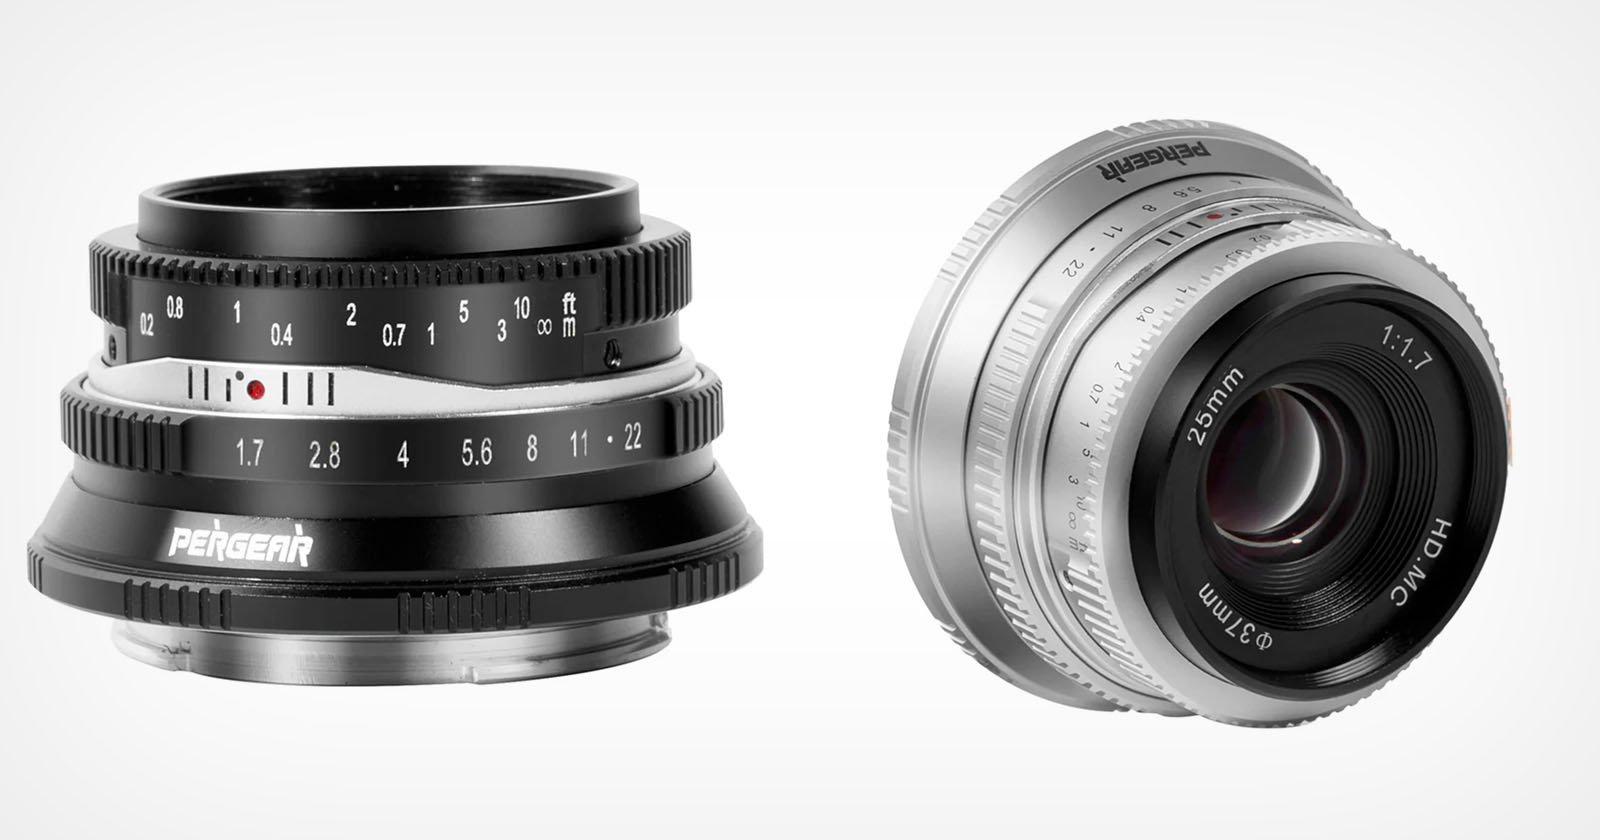 Pergear’s New 25mm f/1.7 APS-C Lens Costs Is Available Now for $69